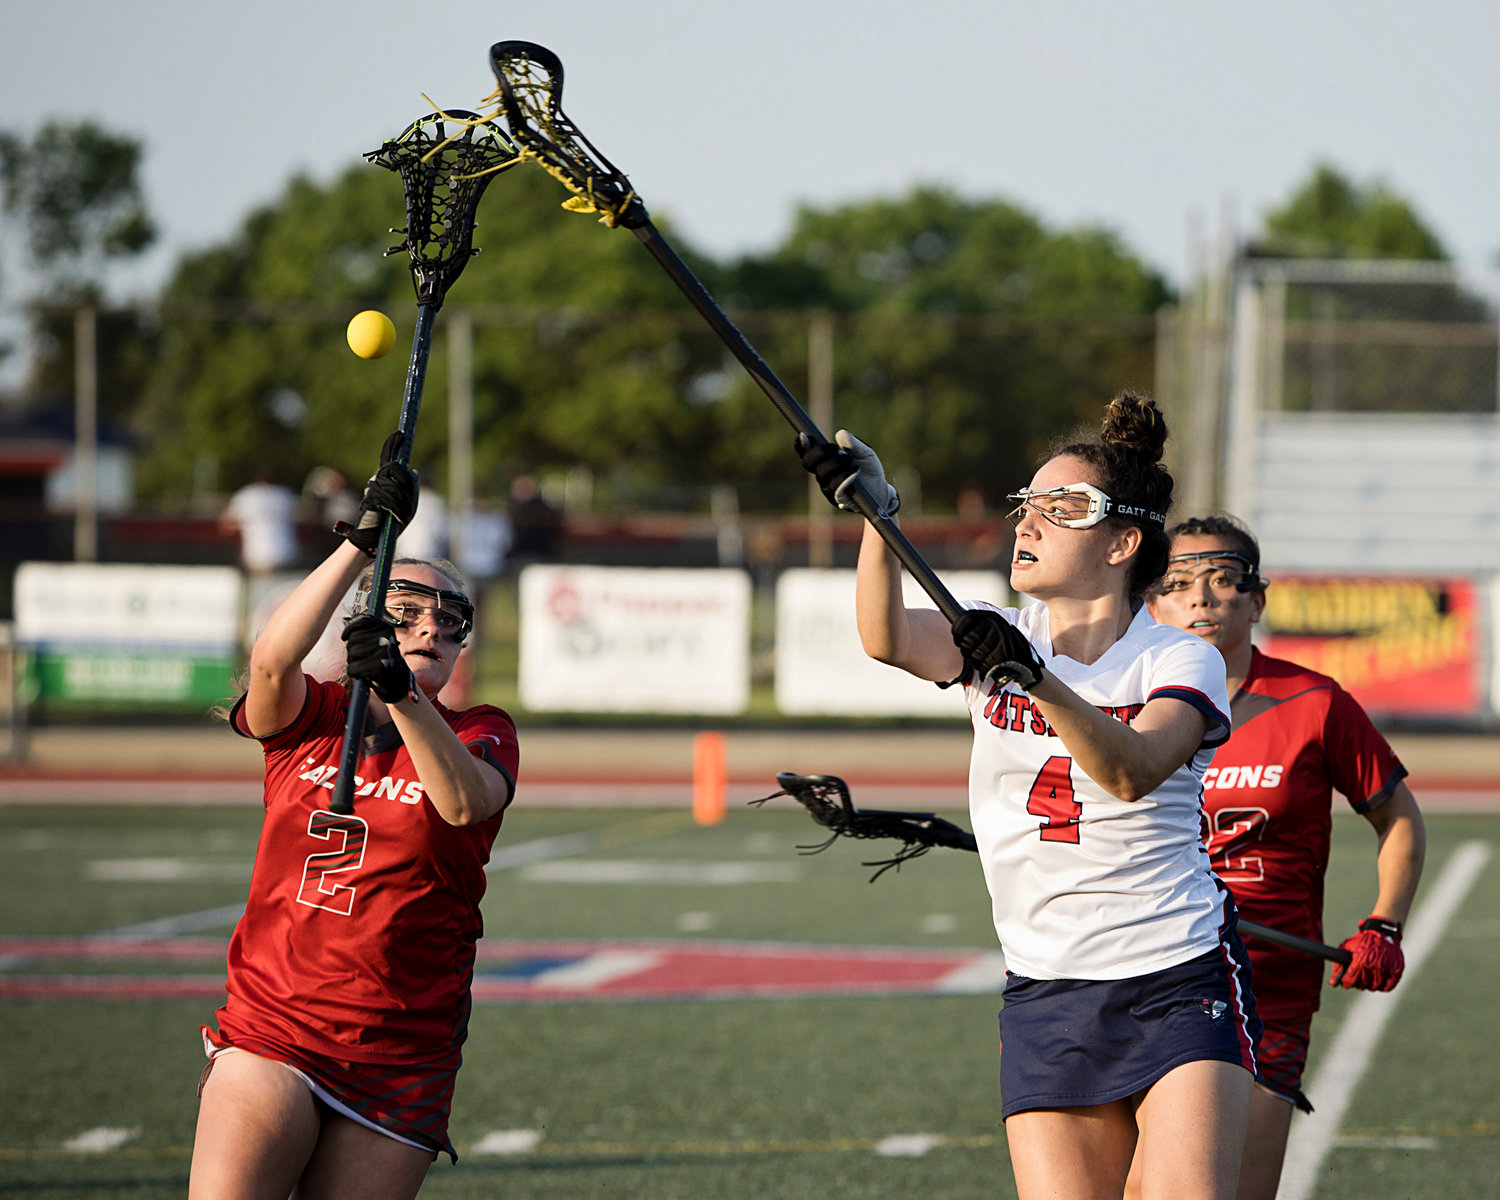 Ellie Skeels knocks the ball out of a Cranston West opponent's stick during the first half of the Division II semifinals.